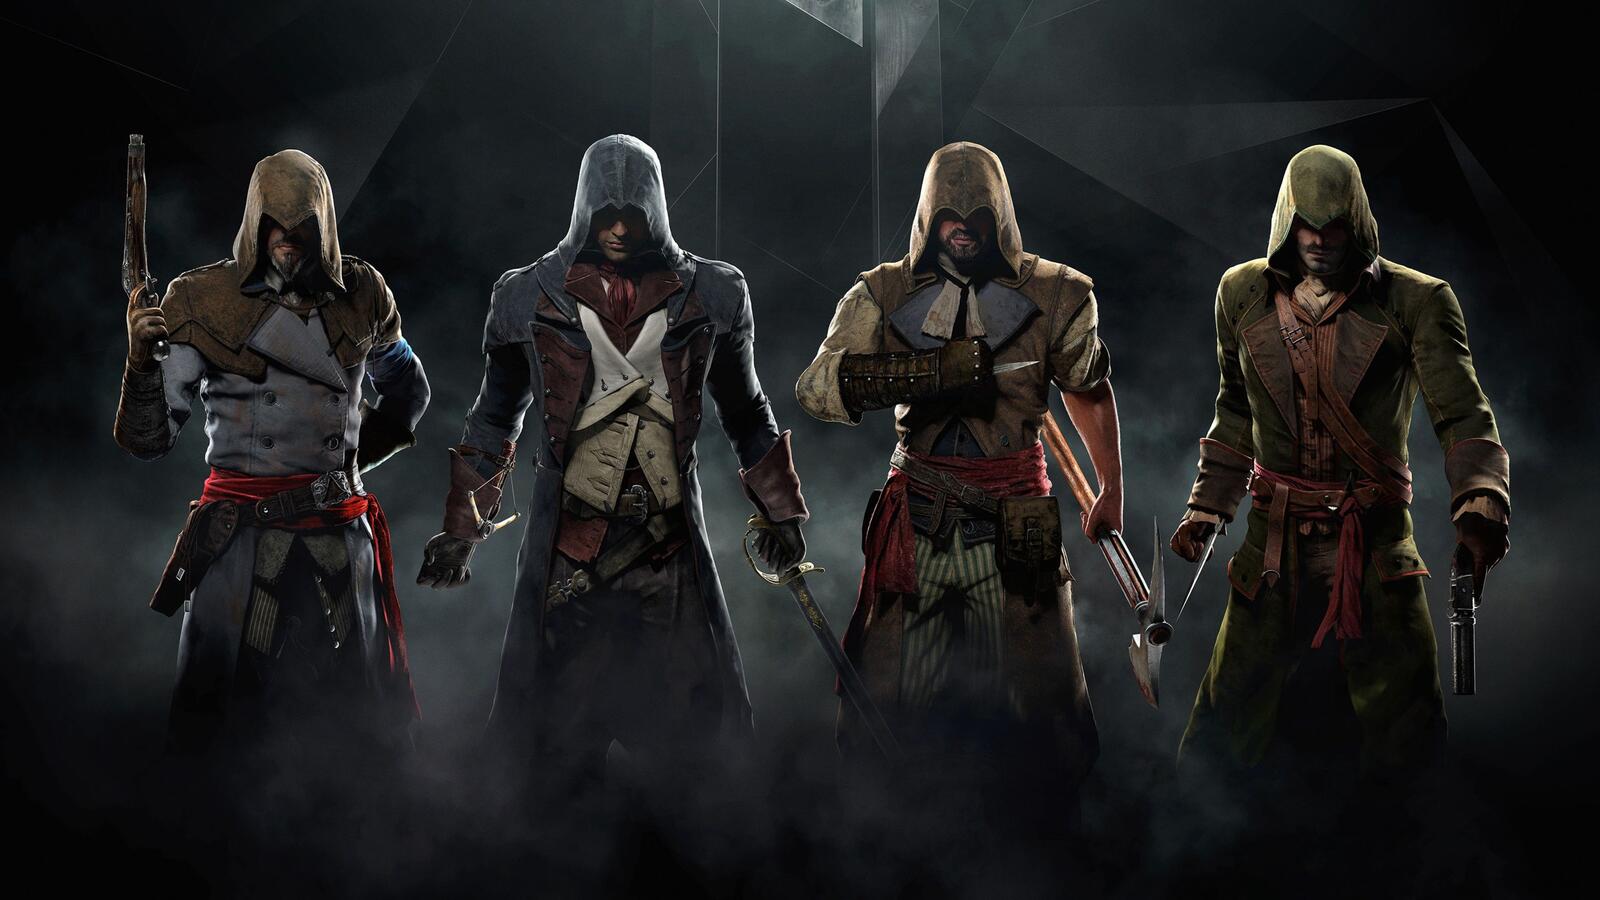 Wallpapers smoke games assassins creed on the desktop